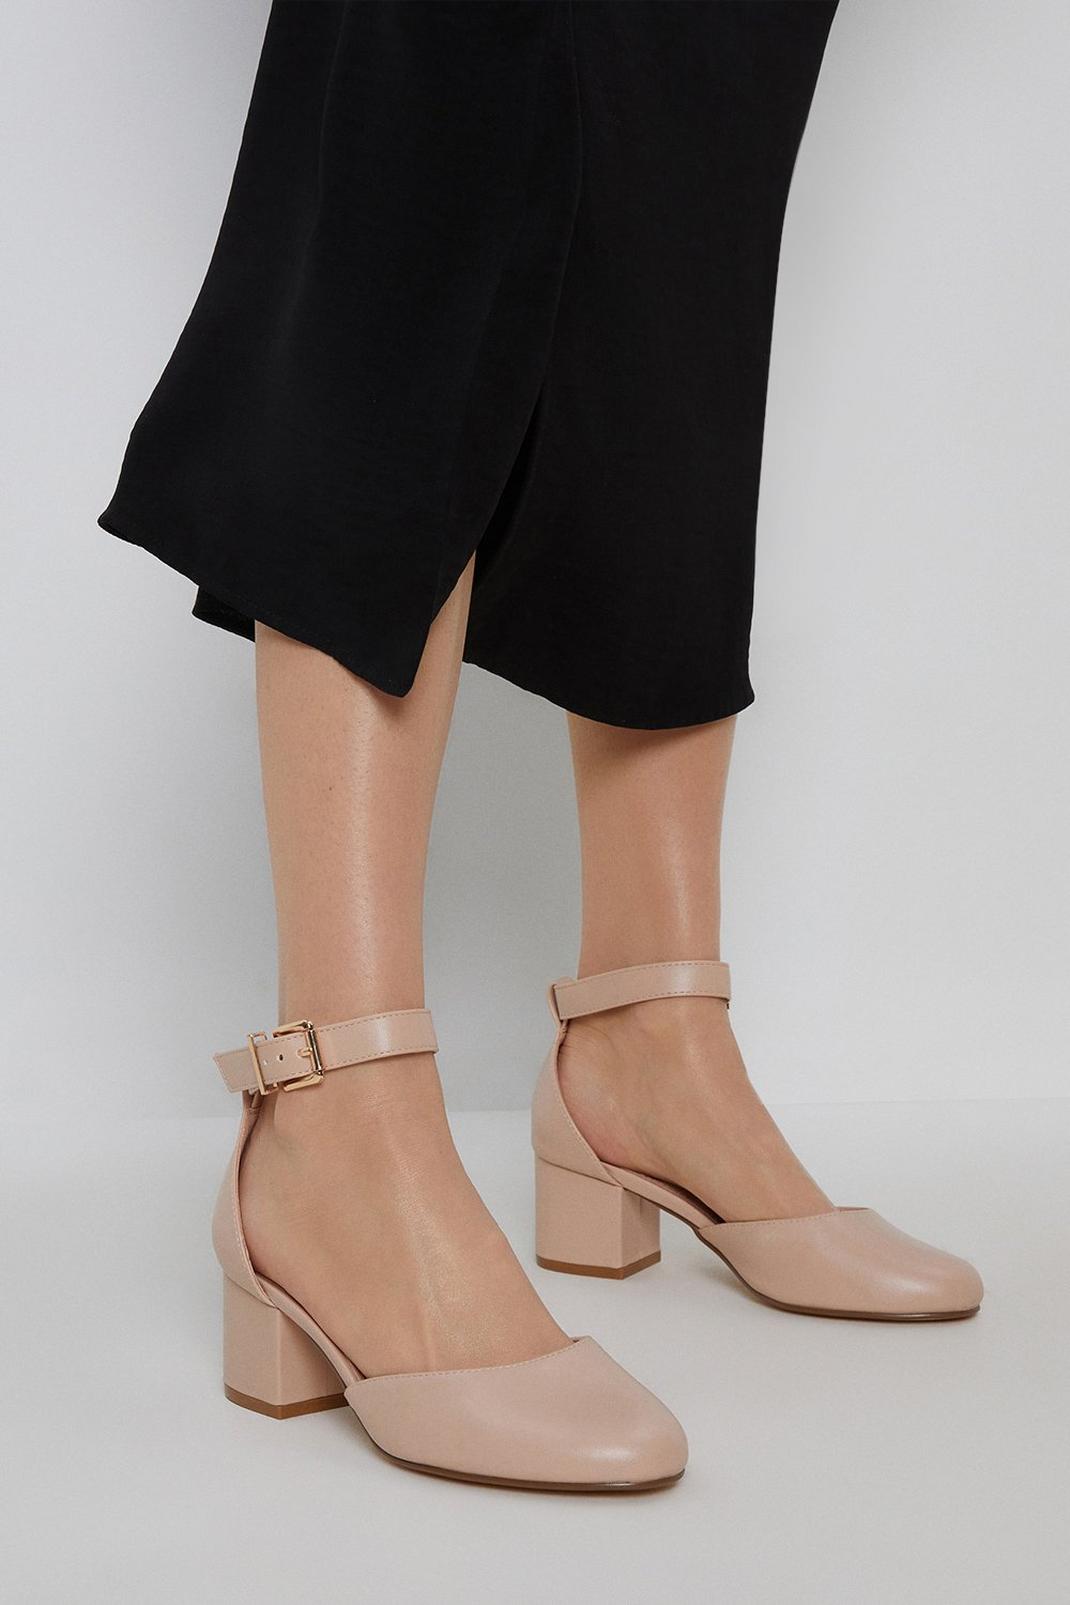 Blush Wide Fit Hope Ankle Strap Closed Toe image number 1